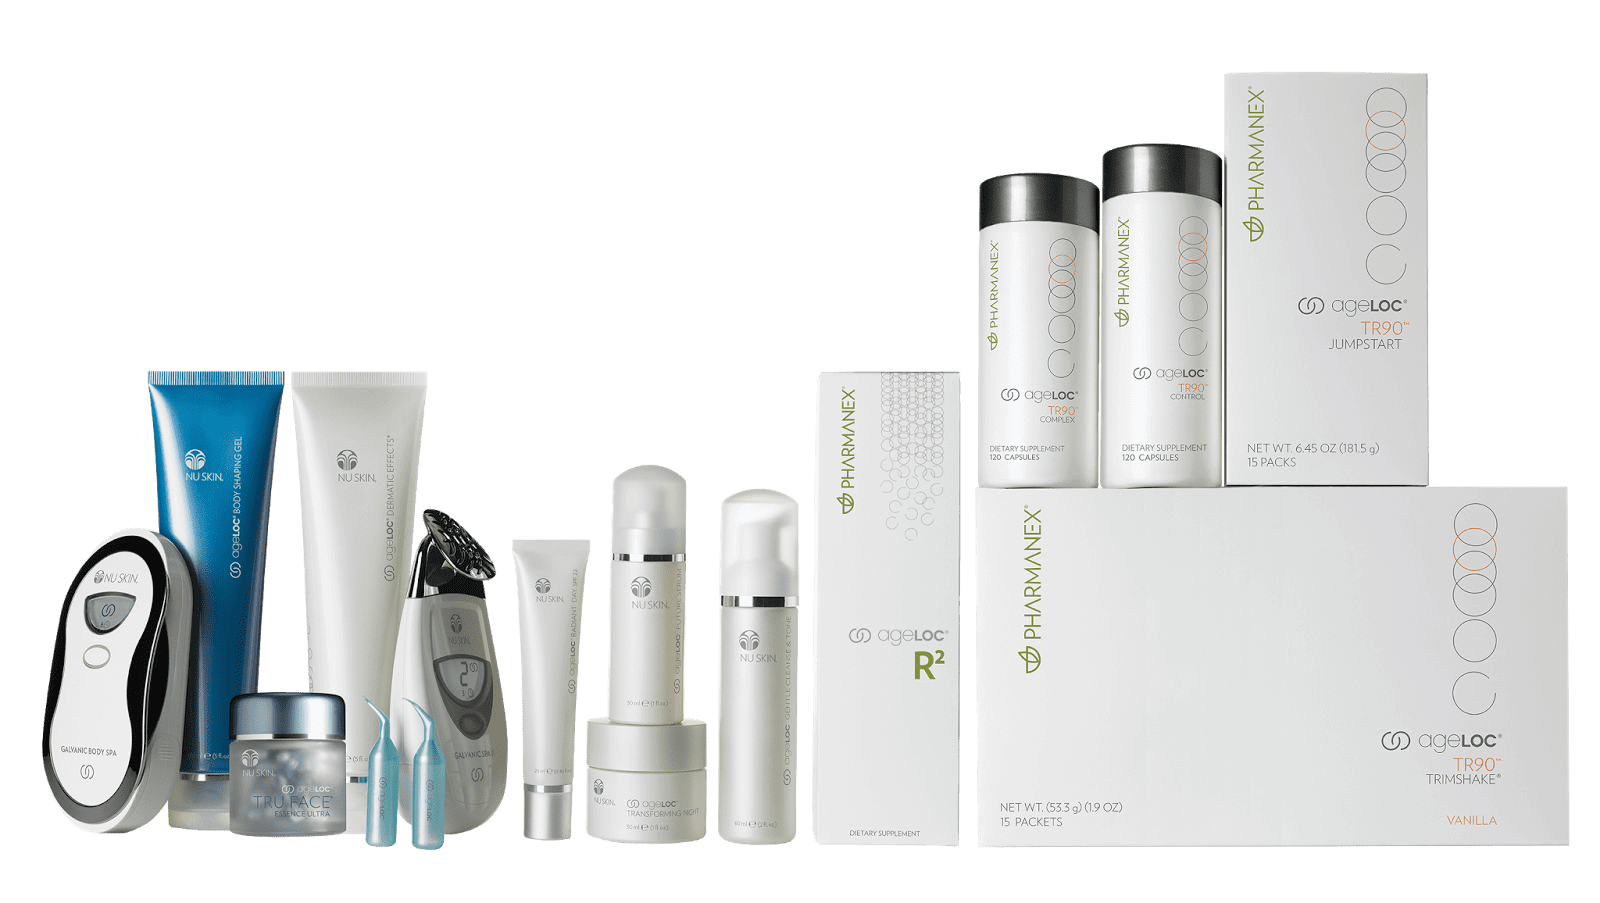 Skincare products by Nu Skin | LJ Aesthetics